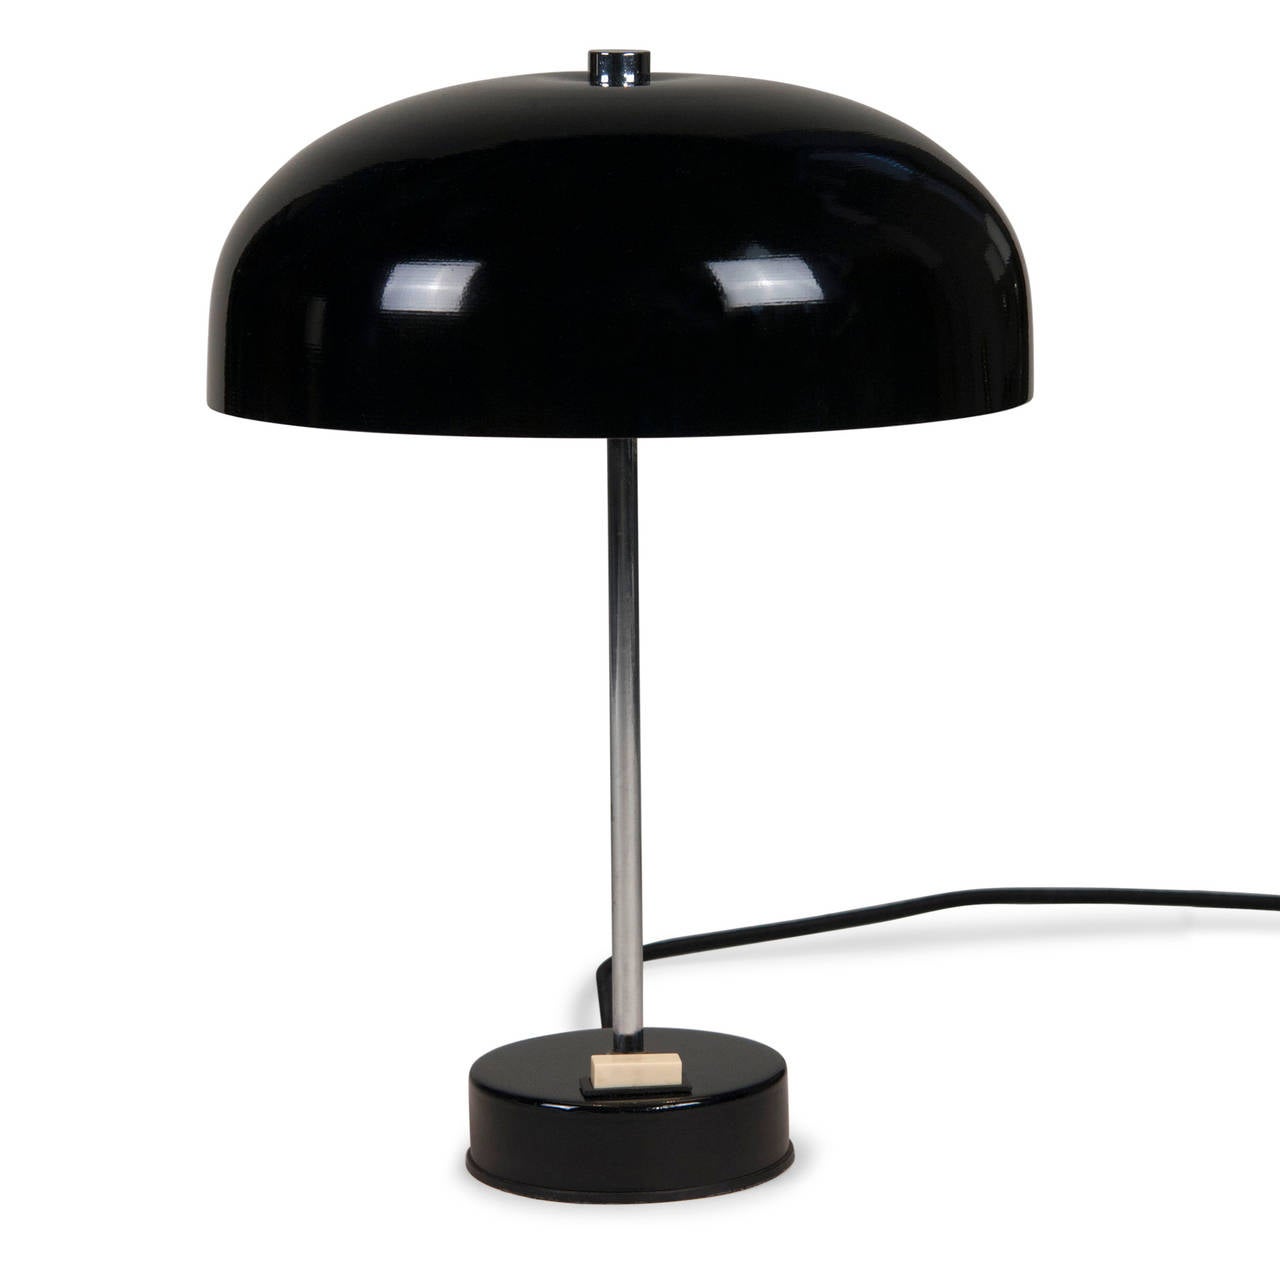 Black lacquered desk lamp, lacquered dome shade mounted on a thin chrome column, with a disc shaped circular base, original toggle switch, German, circa 1970. Overall height 14 in, diameter of shade 10 in, height of shade 4 in, base measures 4 in